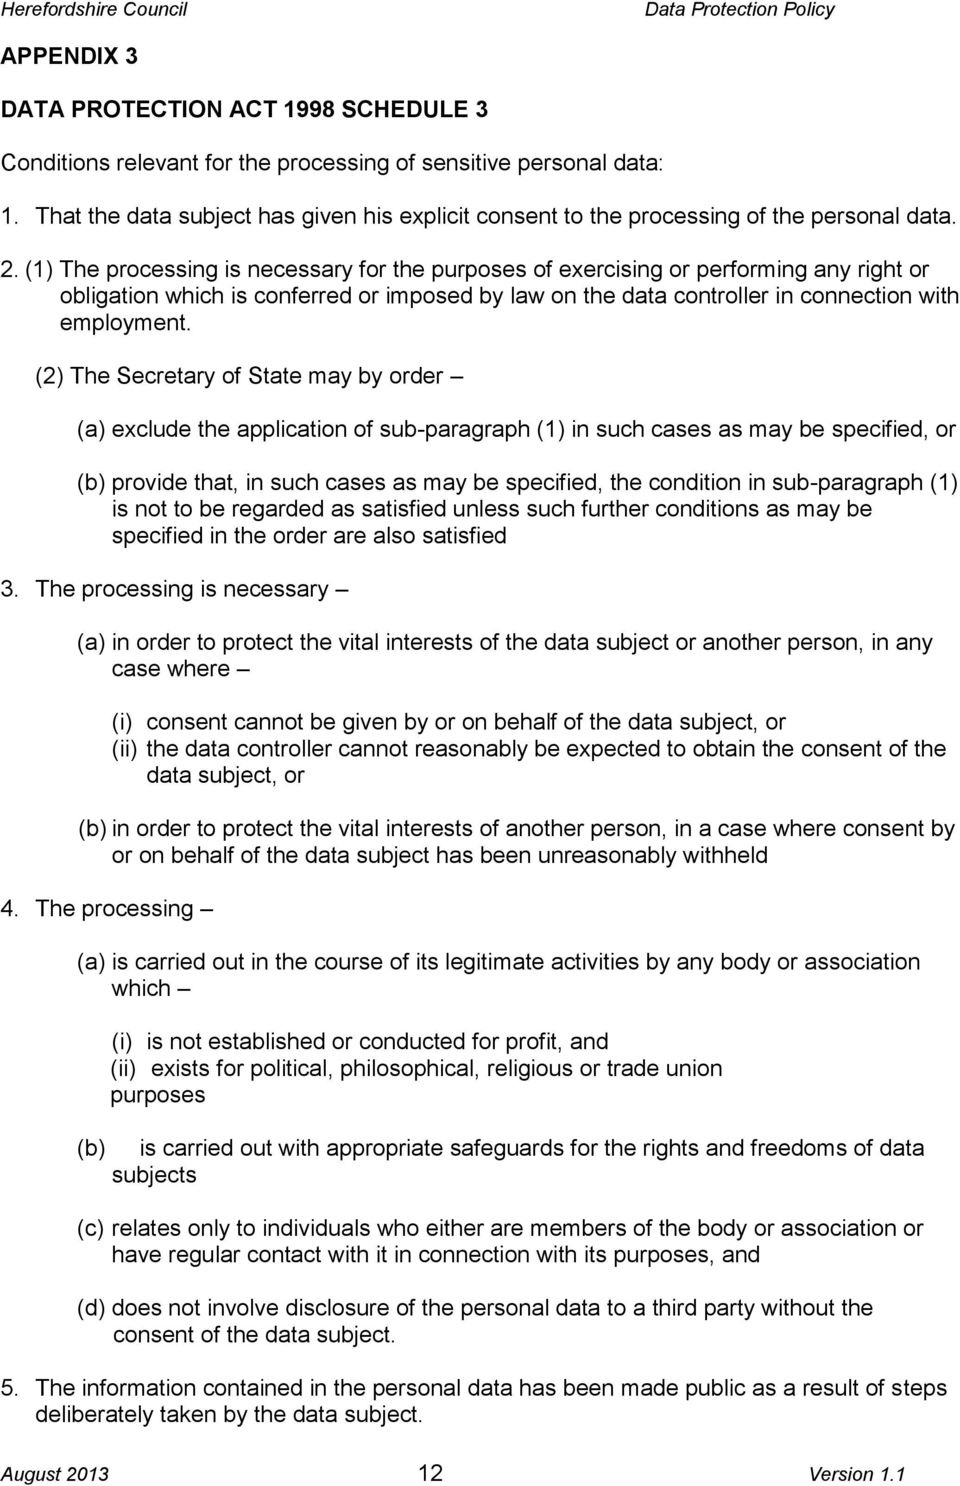 (1) The processing is necessary for the purposes of exercising or performing any right or obligation which is conferred or imposed by law on the data controller in connection with employment.